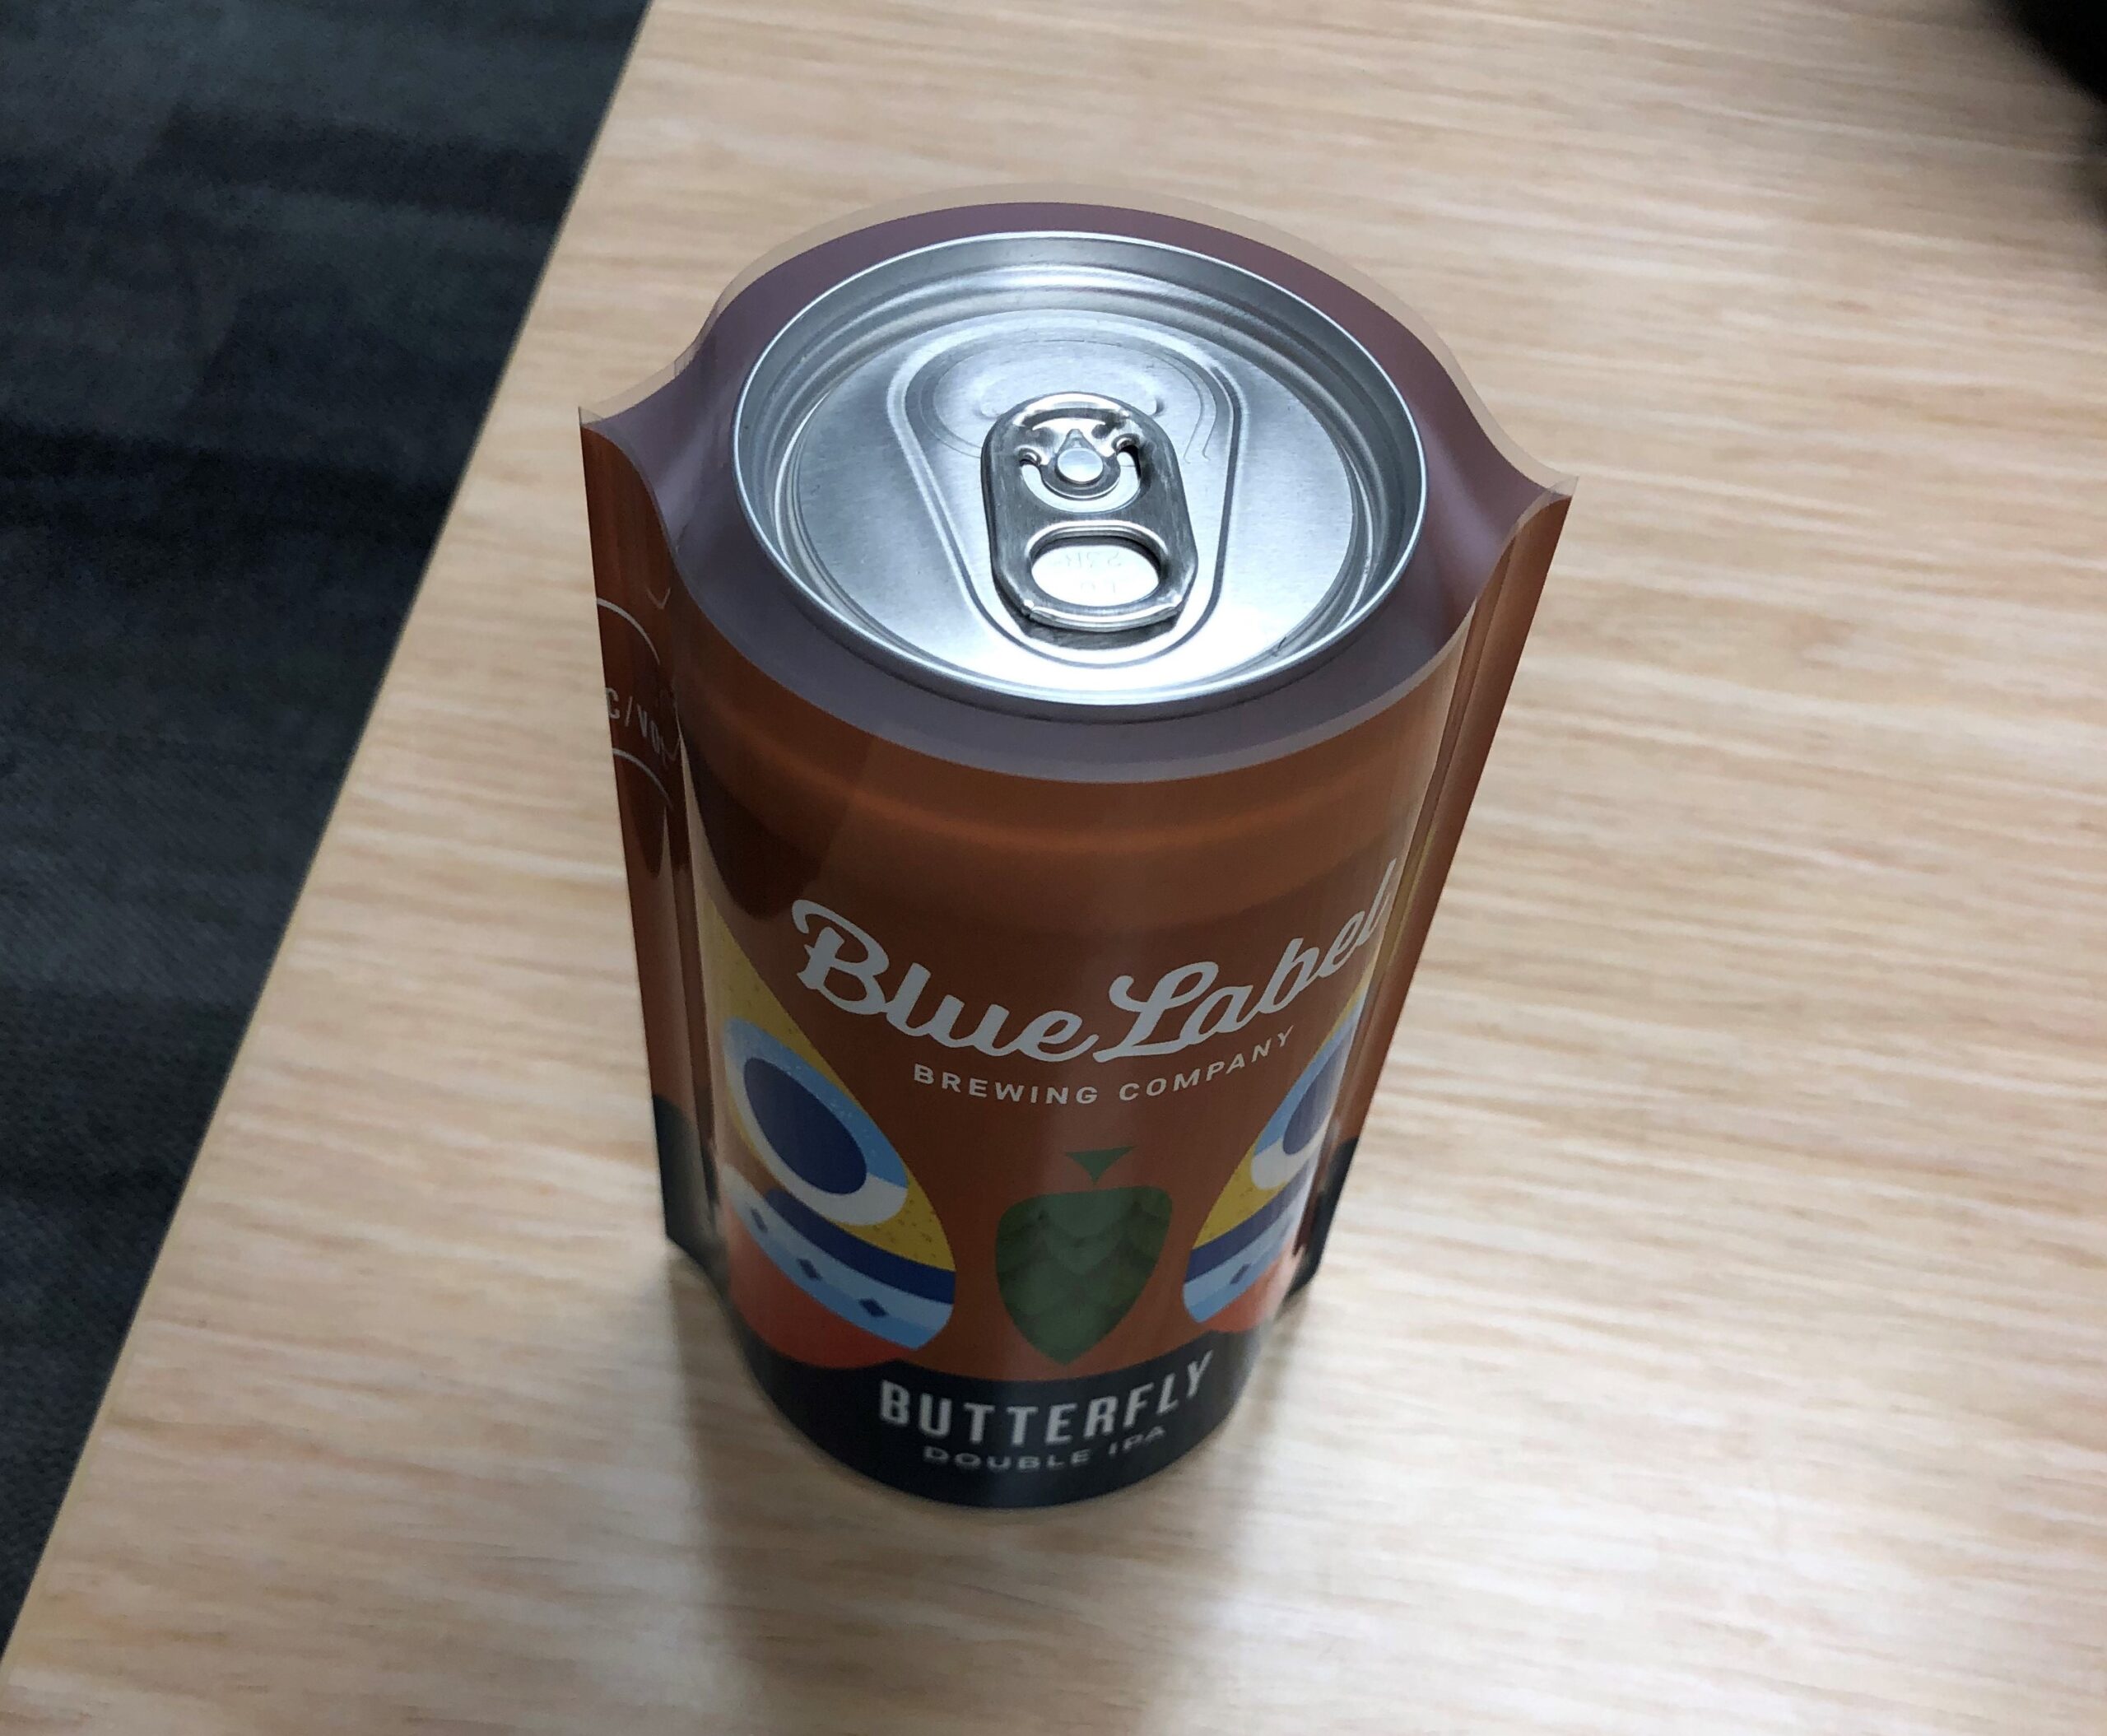 A shrink sleeve slipped over a beer can.